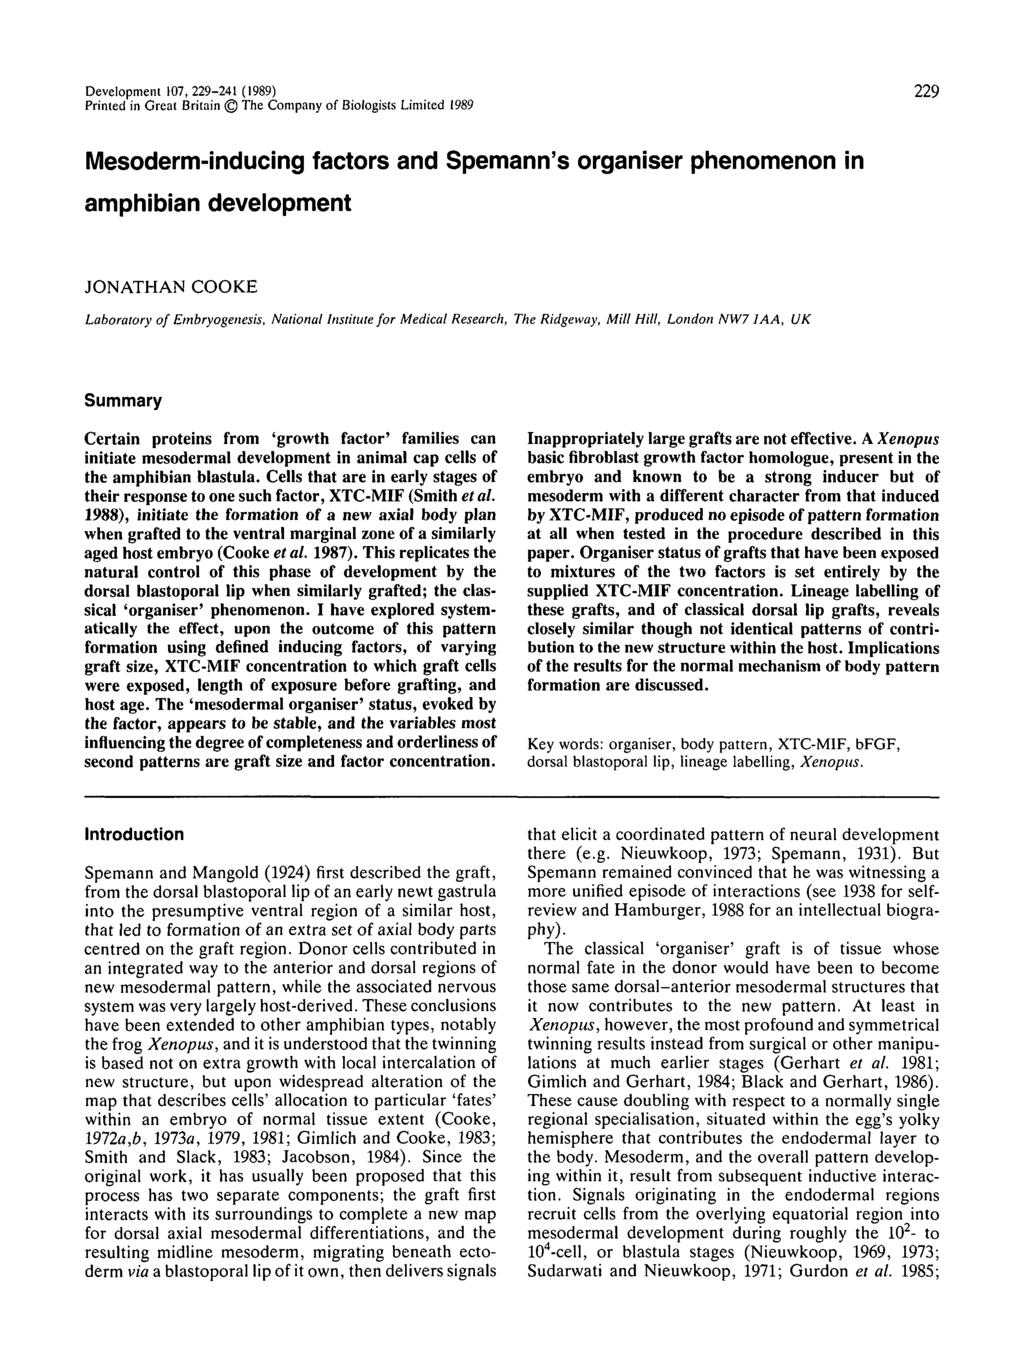 Development 107, 229-241 (1989) Printed in Great Britain The Company of Biologists Limited 1989 229 Mesoderm-inducing factors and Spemann's organiser phenomenon in amphibian development JONATHAN